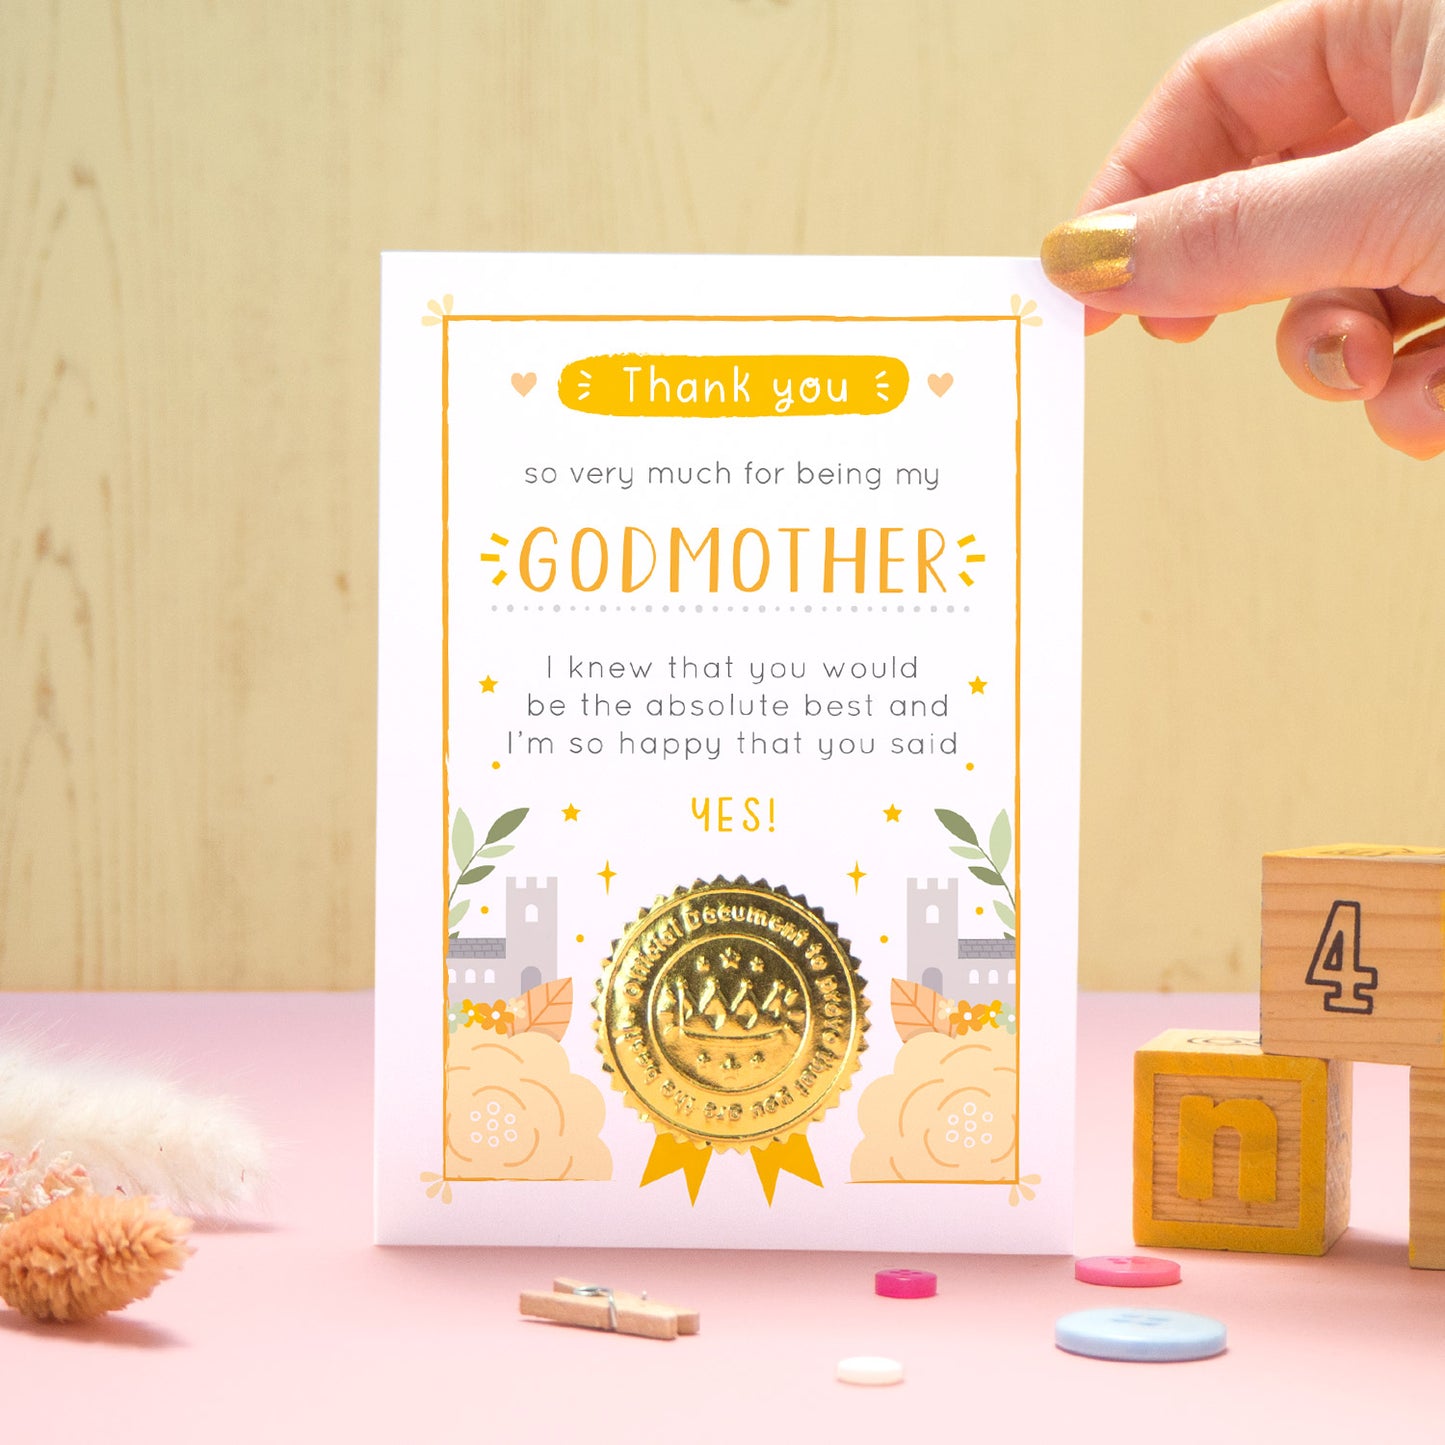 A ‘thank you for being my godmother’ certificate card with a shiny gold seal in the orange colour palette standing in front of a yellow and pink background with building blocks, buttons and dry flowers.